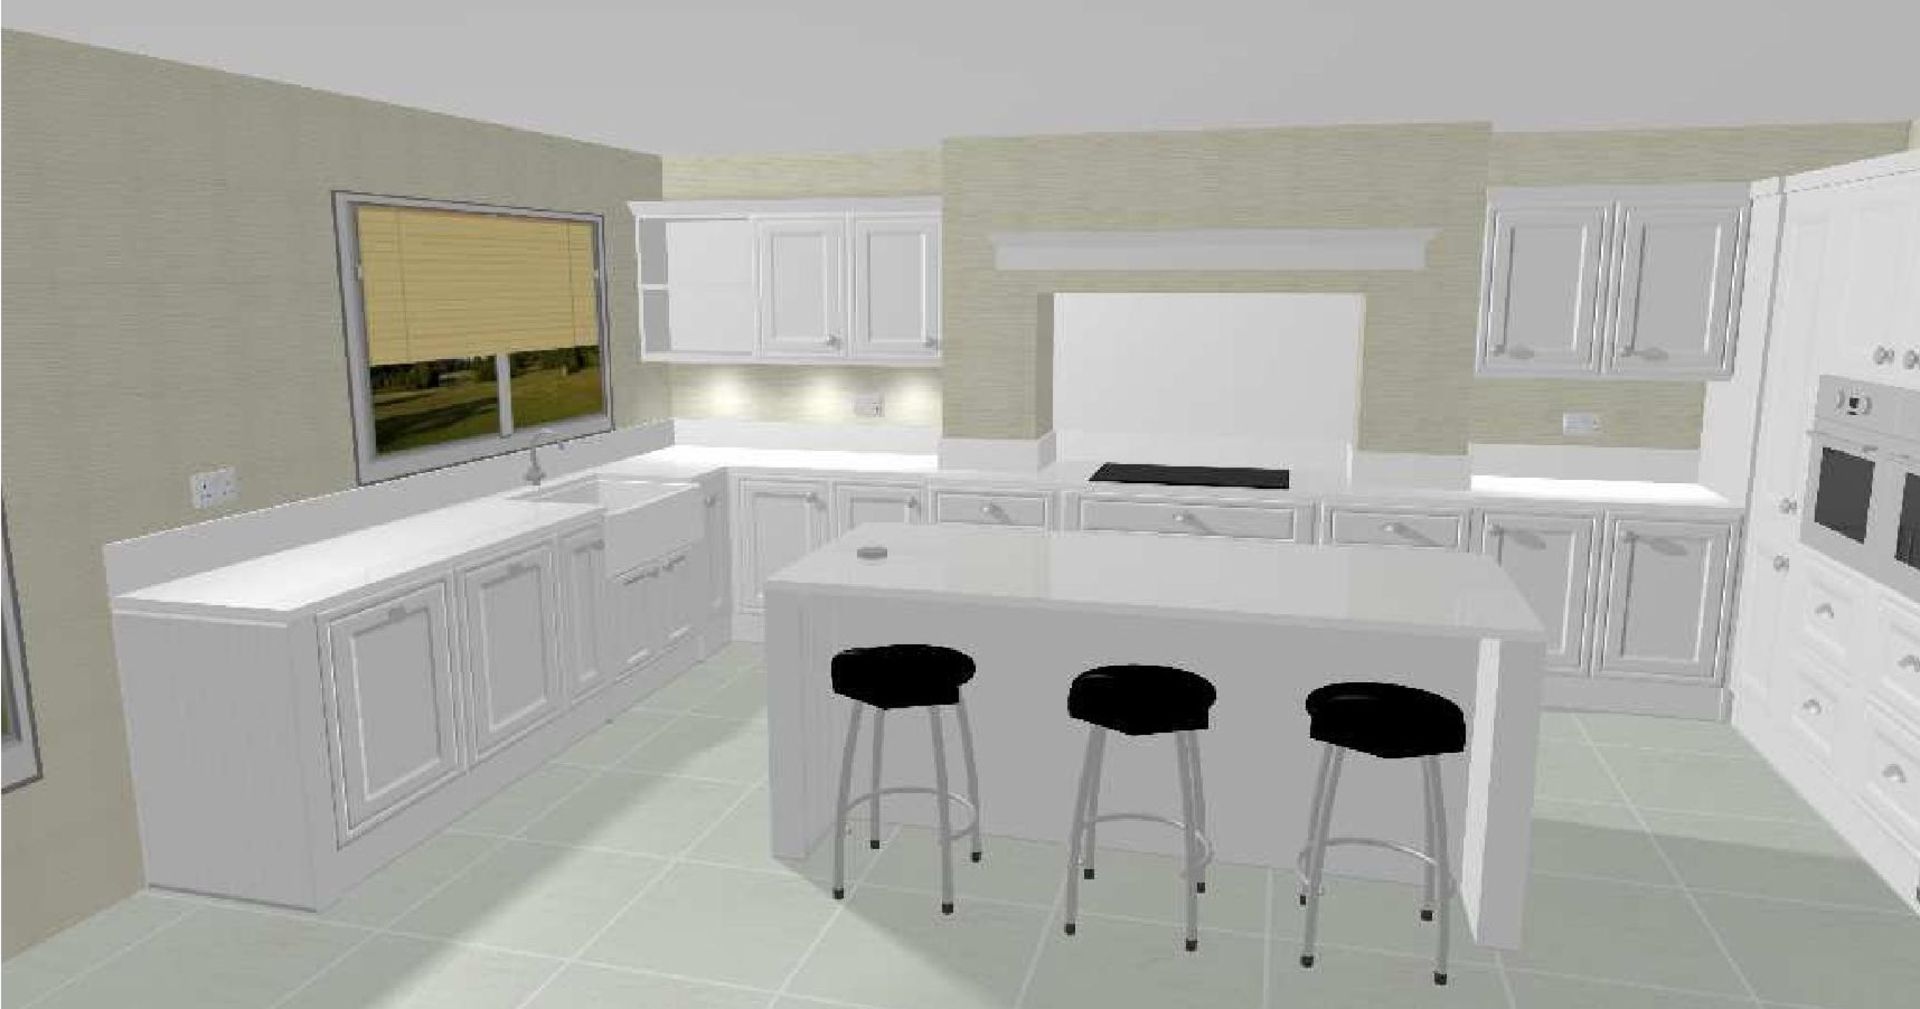 New Fitted Kitchen Designed By 1909 Kitchens - CL338 - Location: Rainhill - Value - £17,000